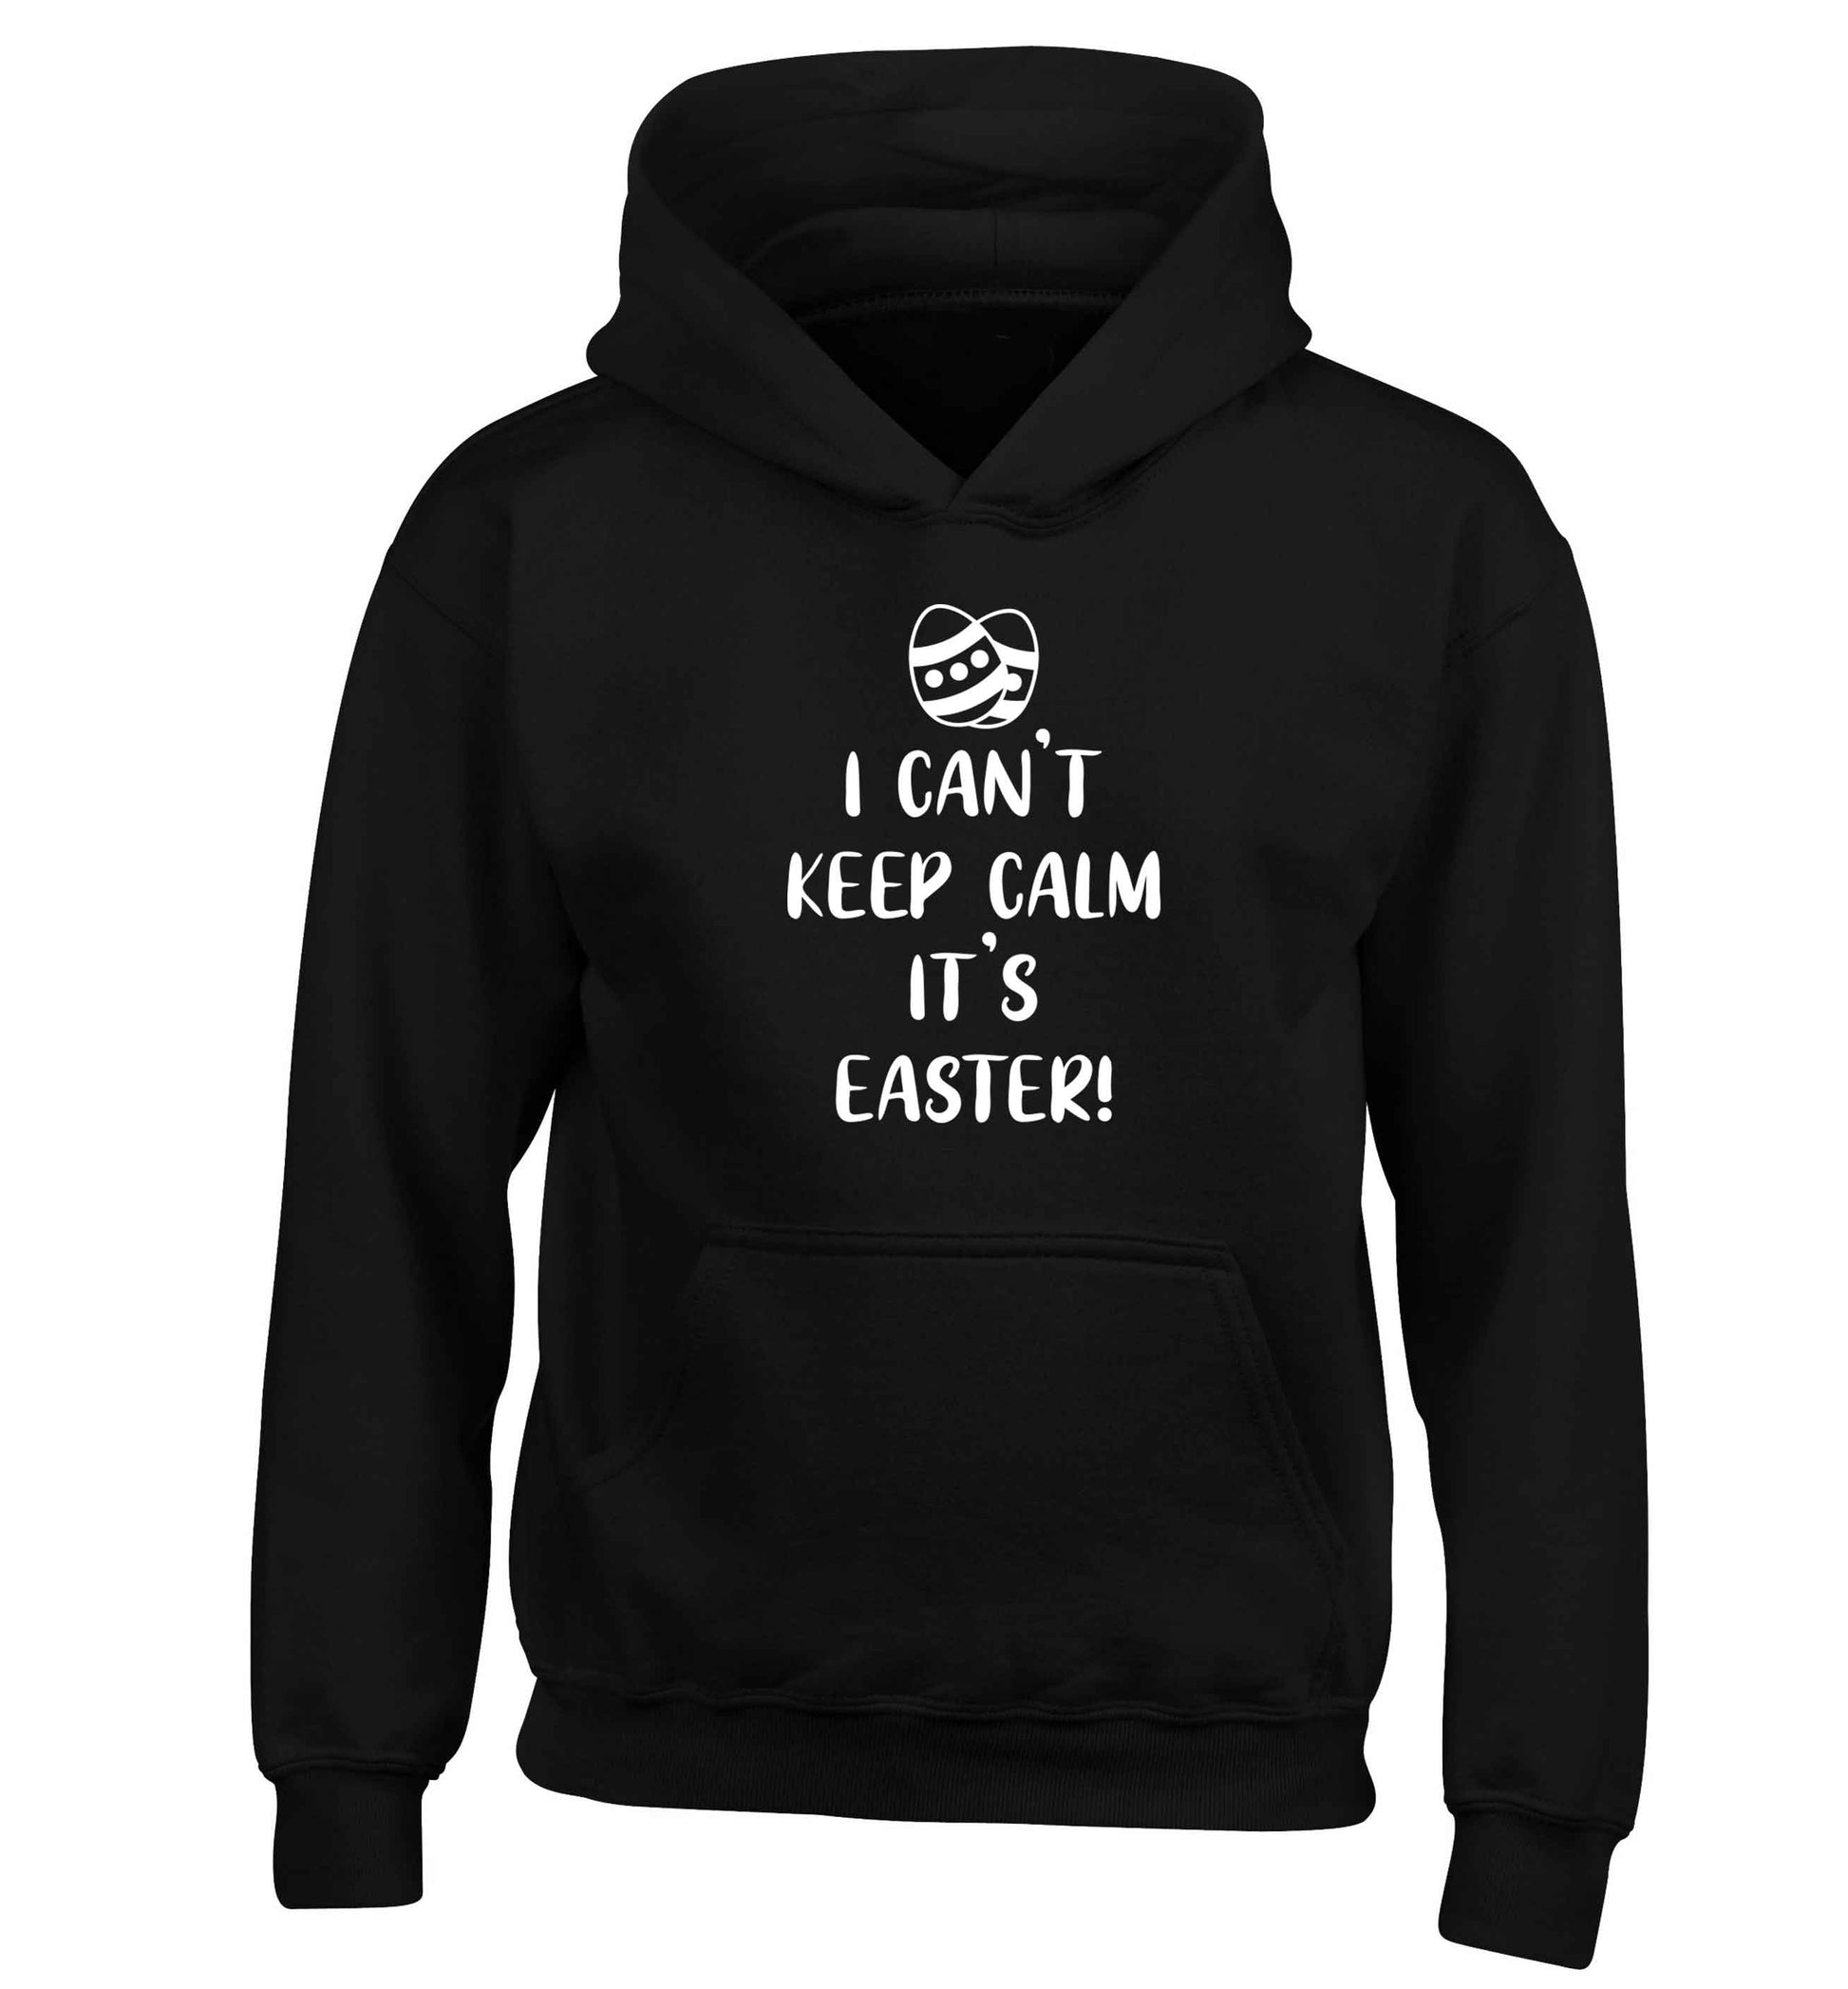 I can't keep calm it's Easter children's black hoodie 12-13 Years